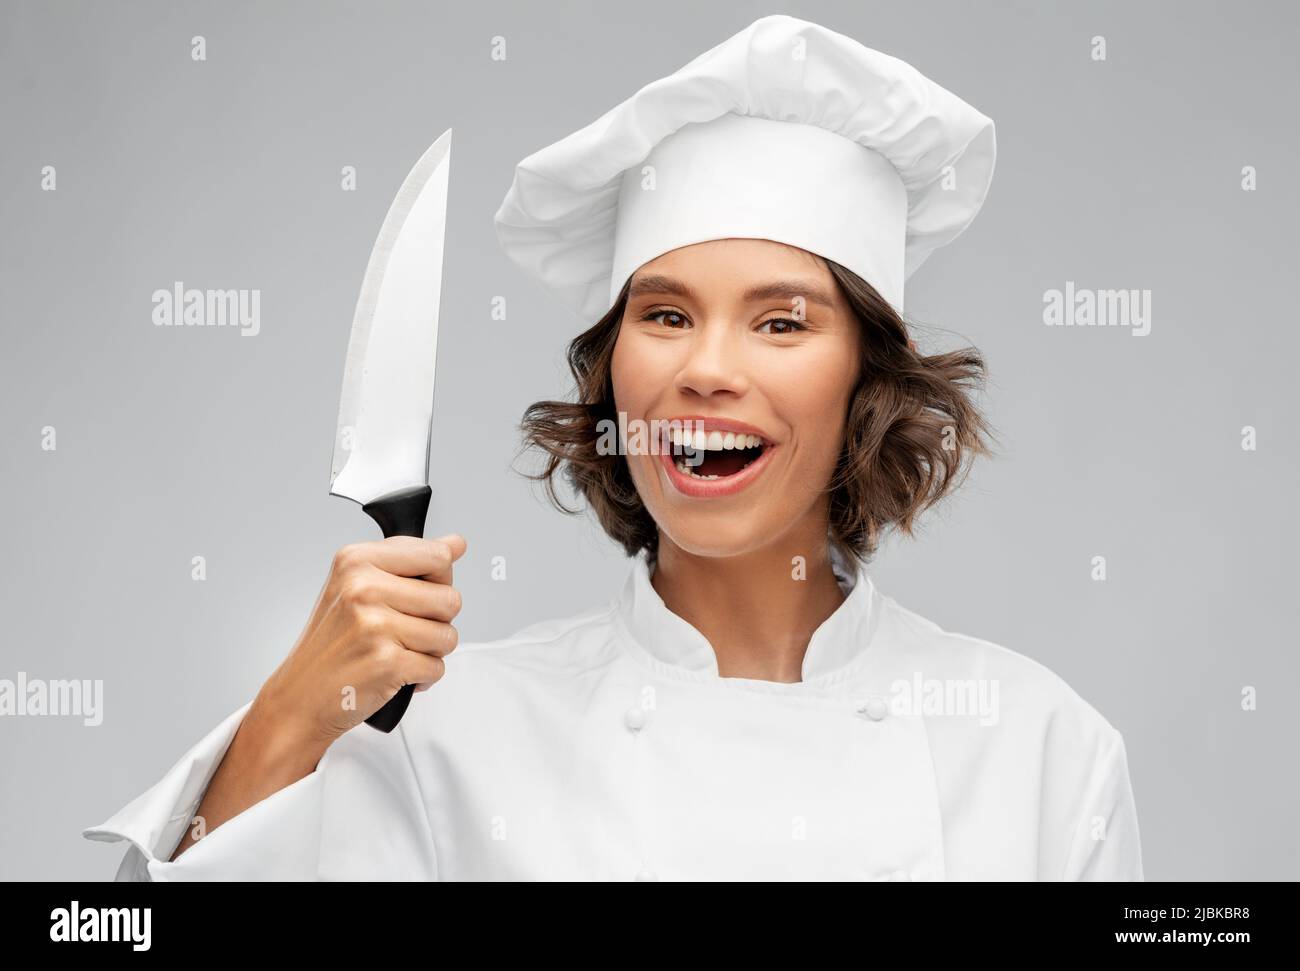 smiling female chef in toque with kitchen knife Stock Photo